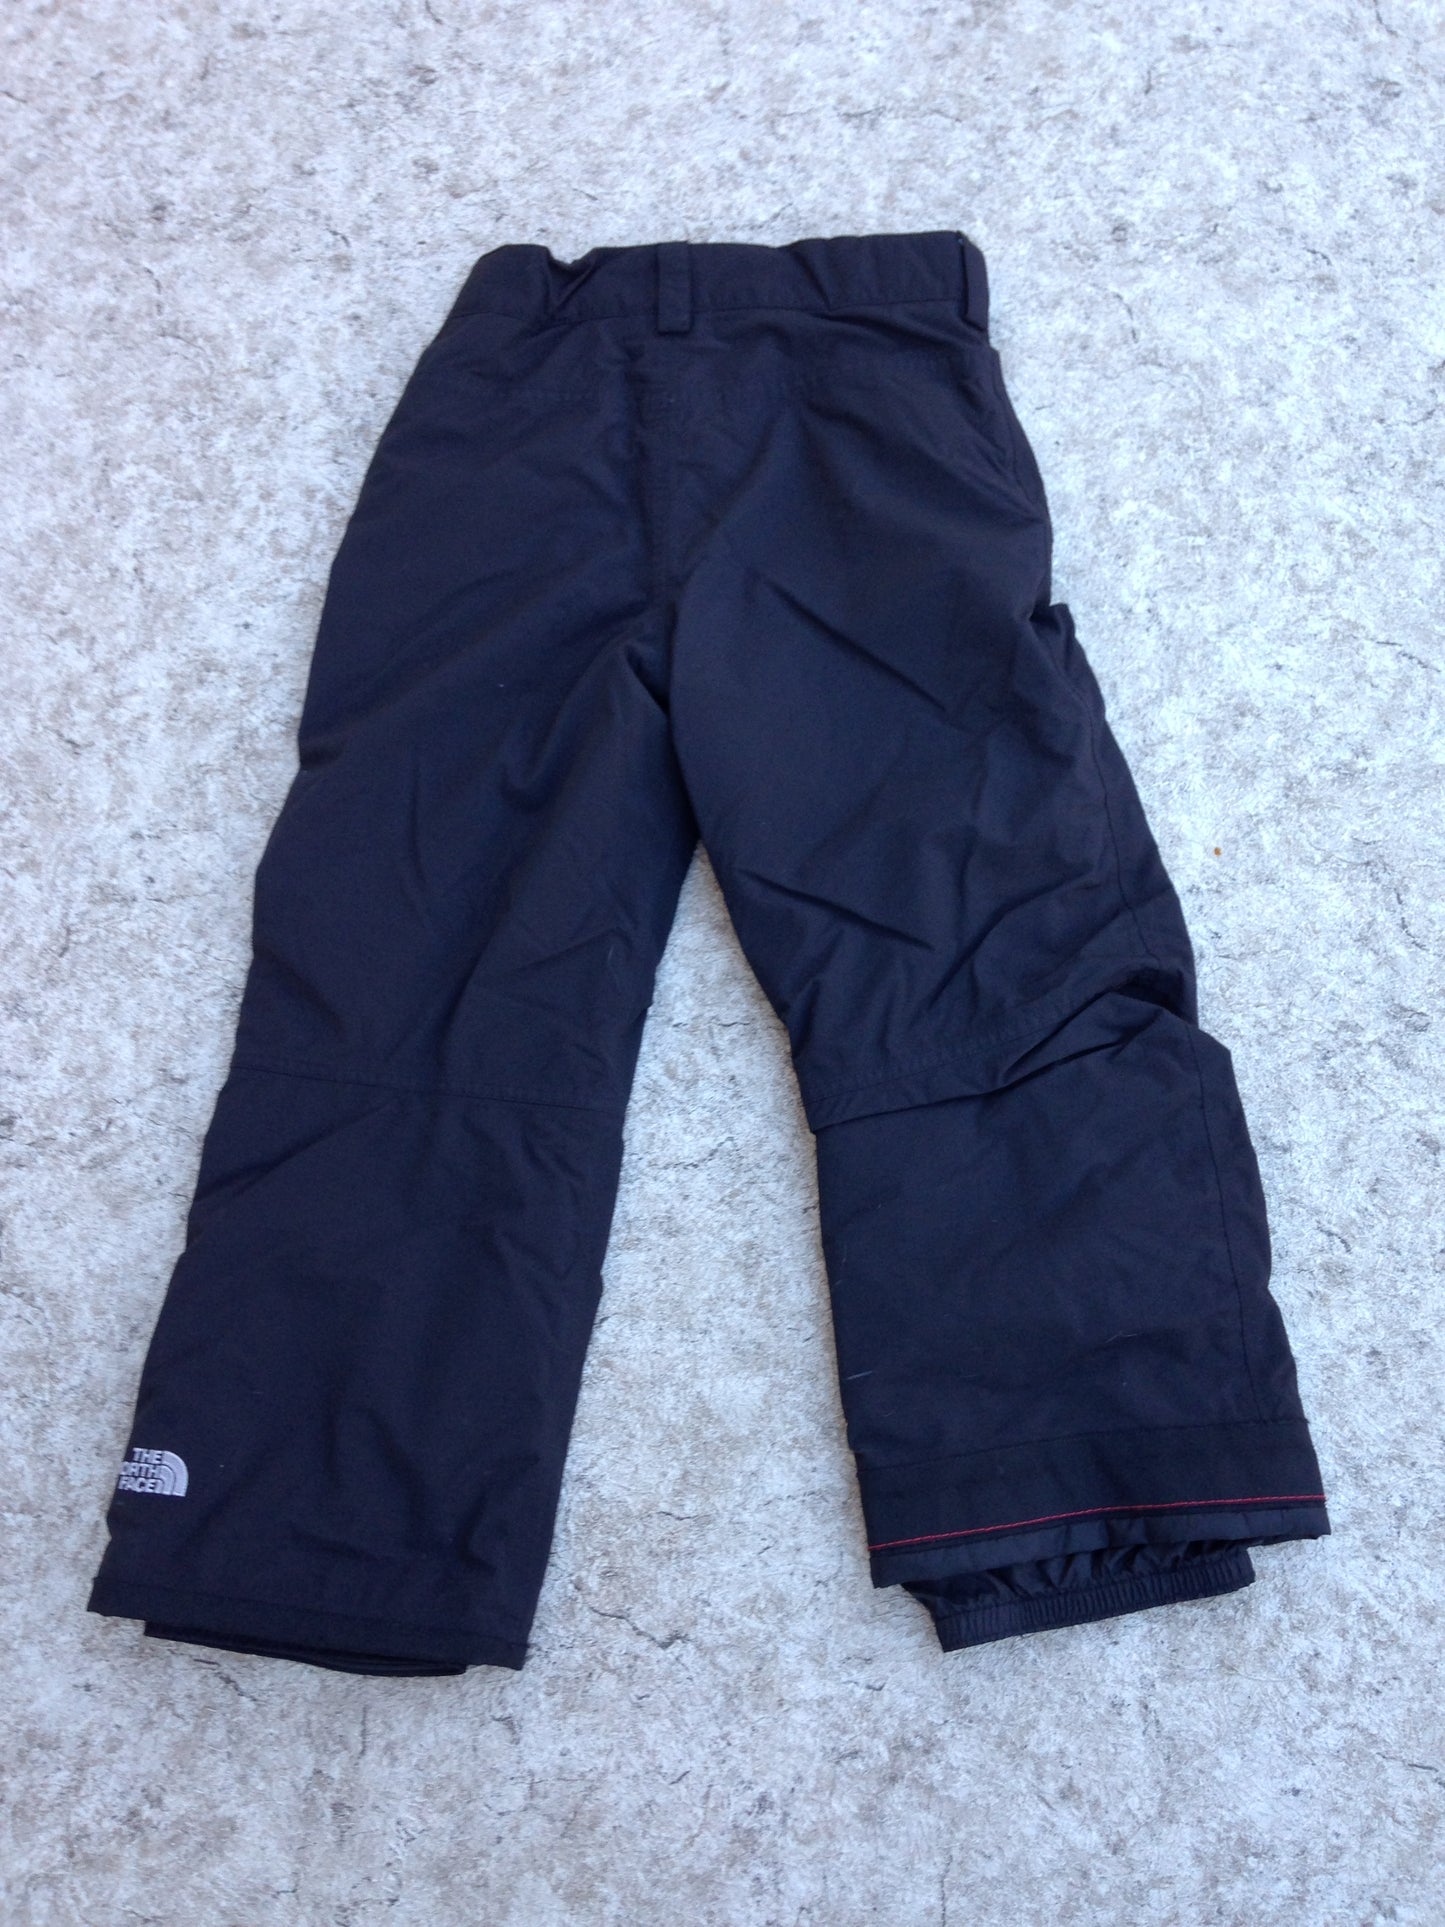 Snow Pants Child Size 10-12 The North Face Black Adjustable Waist Outstanding Quality Snowboarding